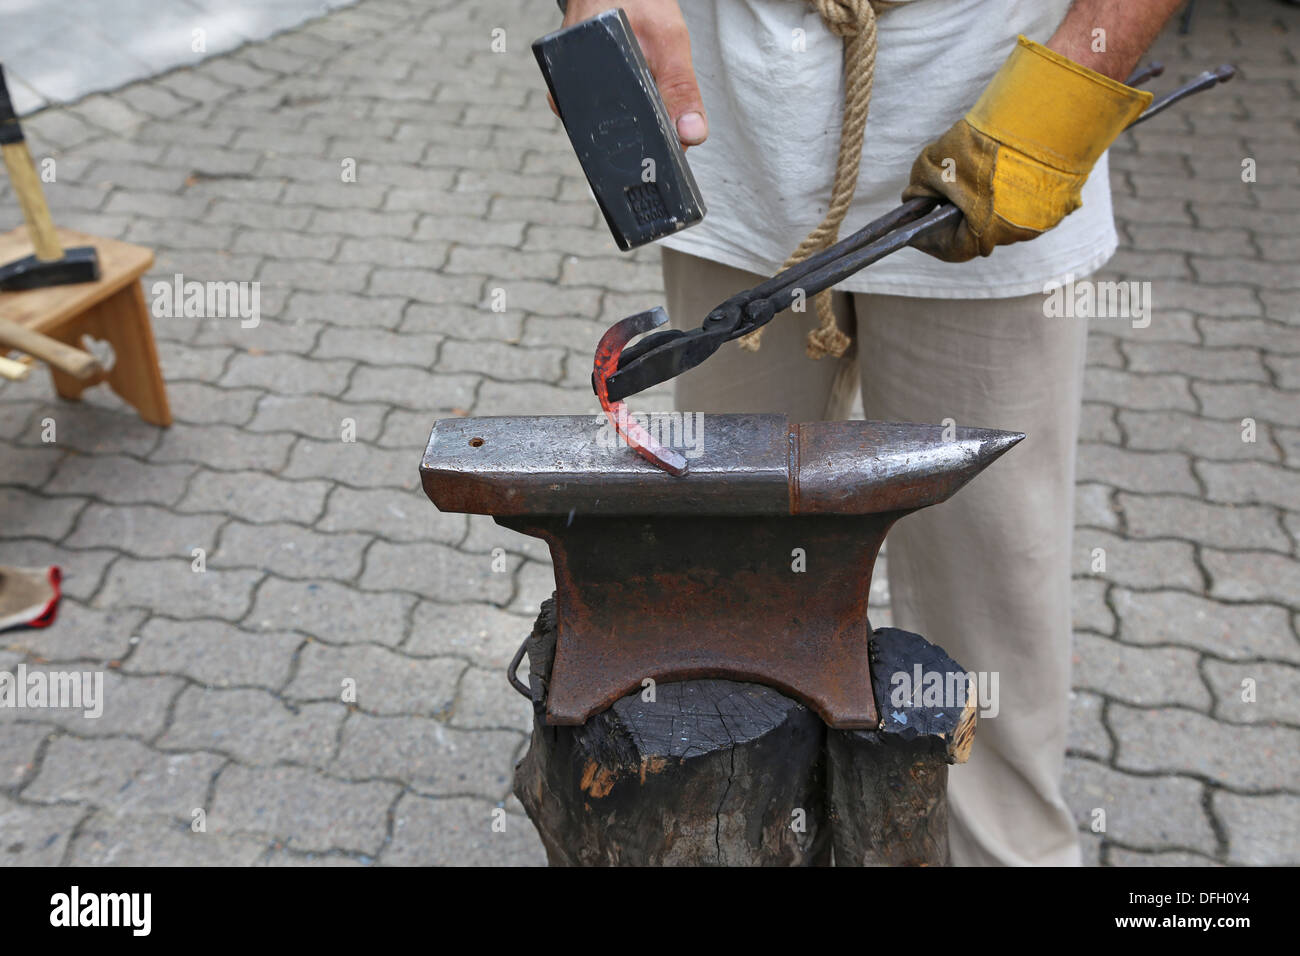 Blacksmith forges a hot shoe on the anvil Stock Photo